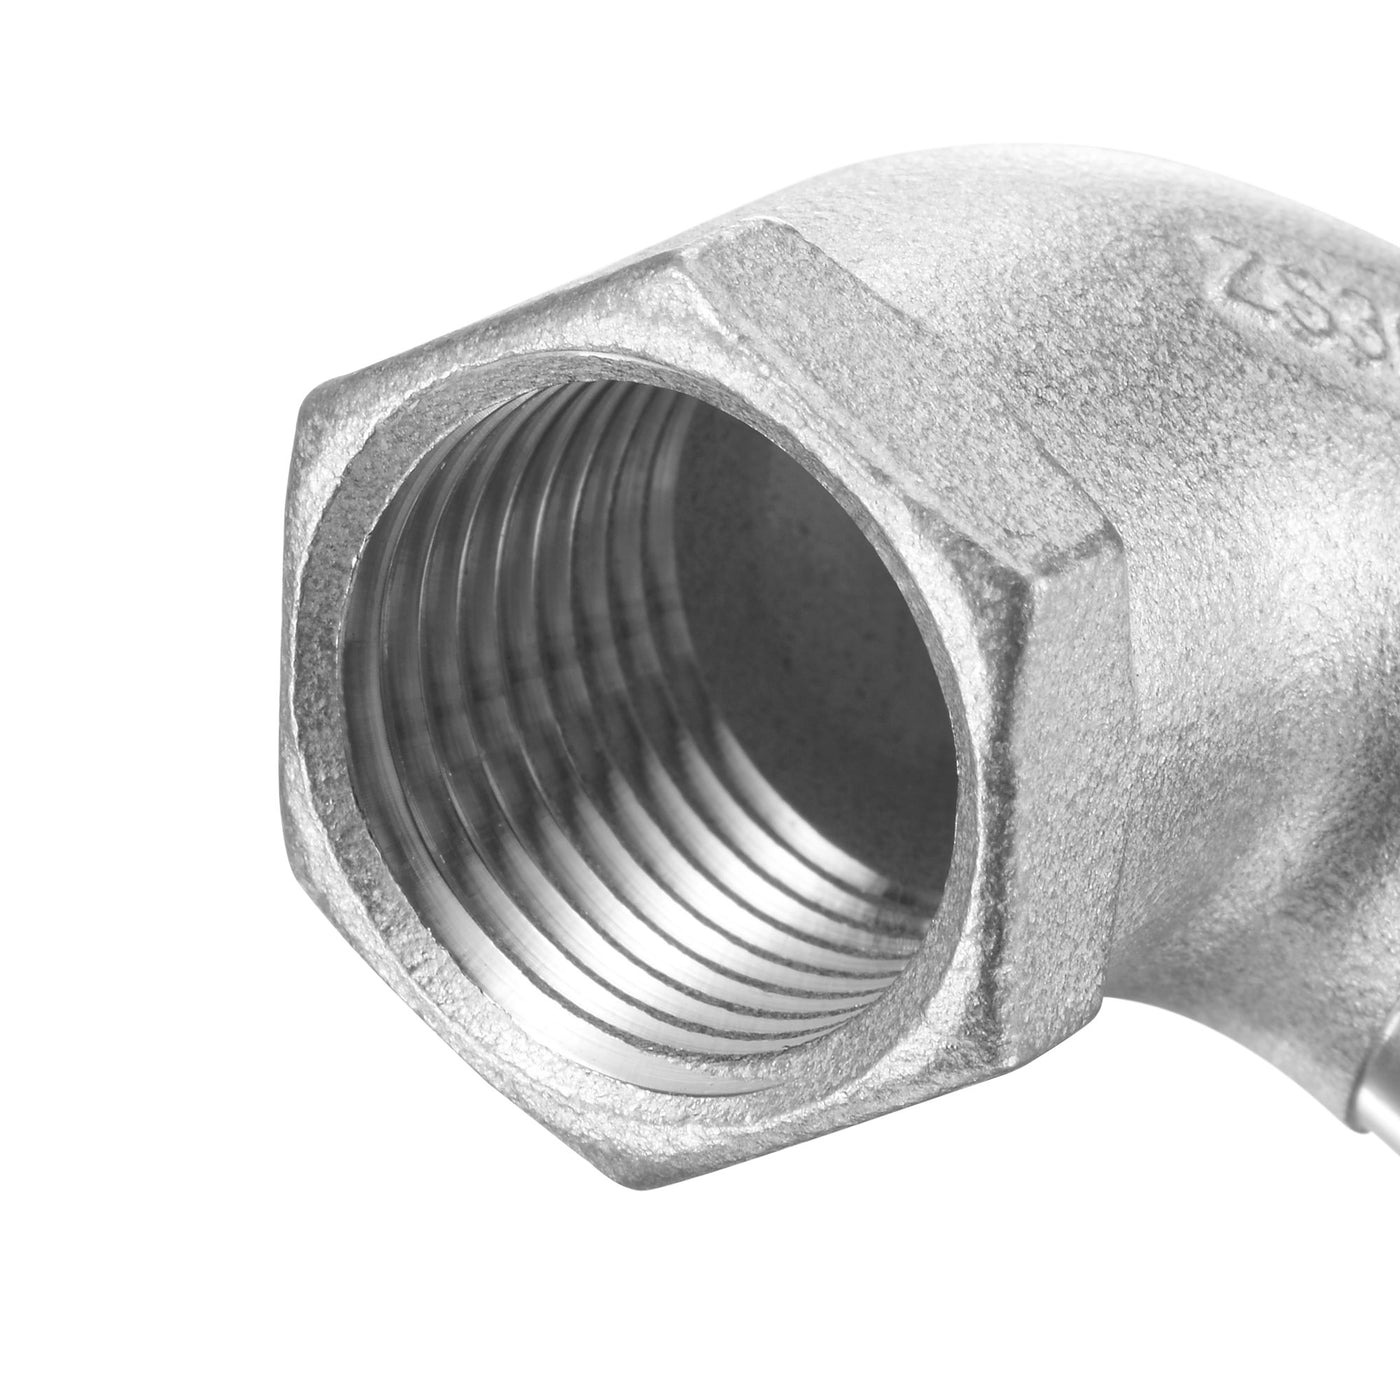 uxcell Uxcell 304 Stainless Steel Hose Barb Fittings Elbow Barbed NPT Female Pipe Connector Adapter for Water Fuel Air Home